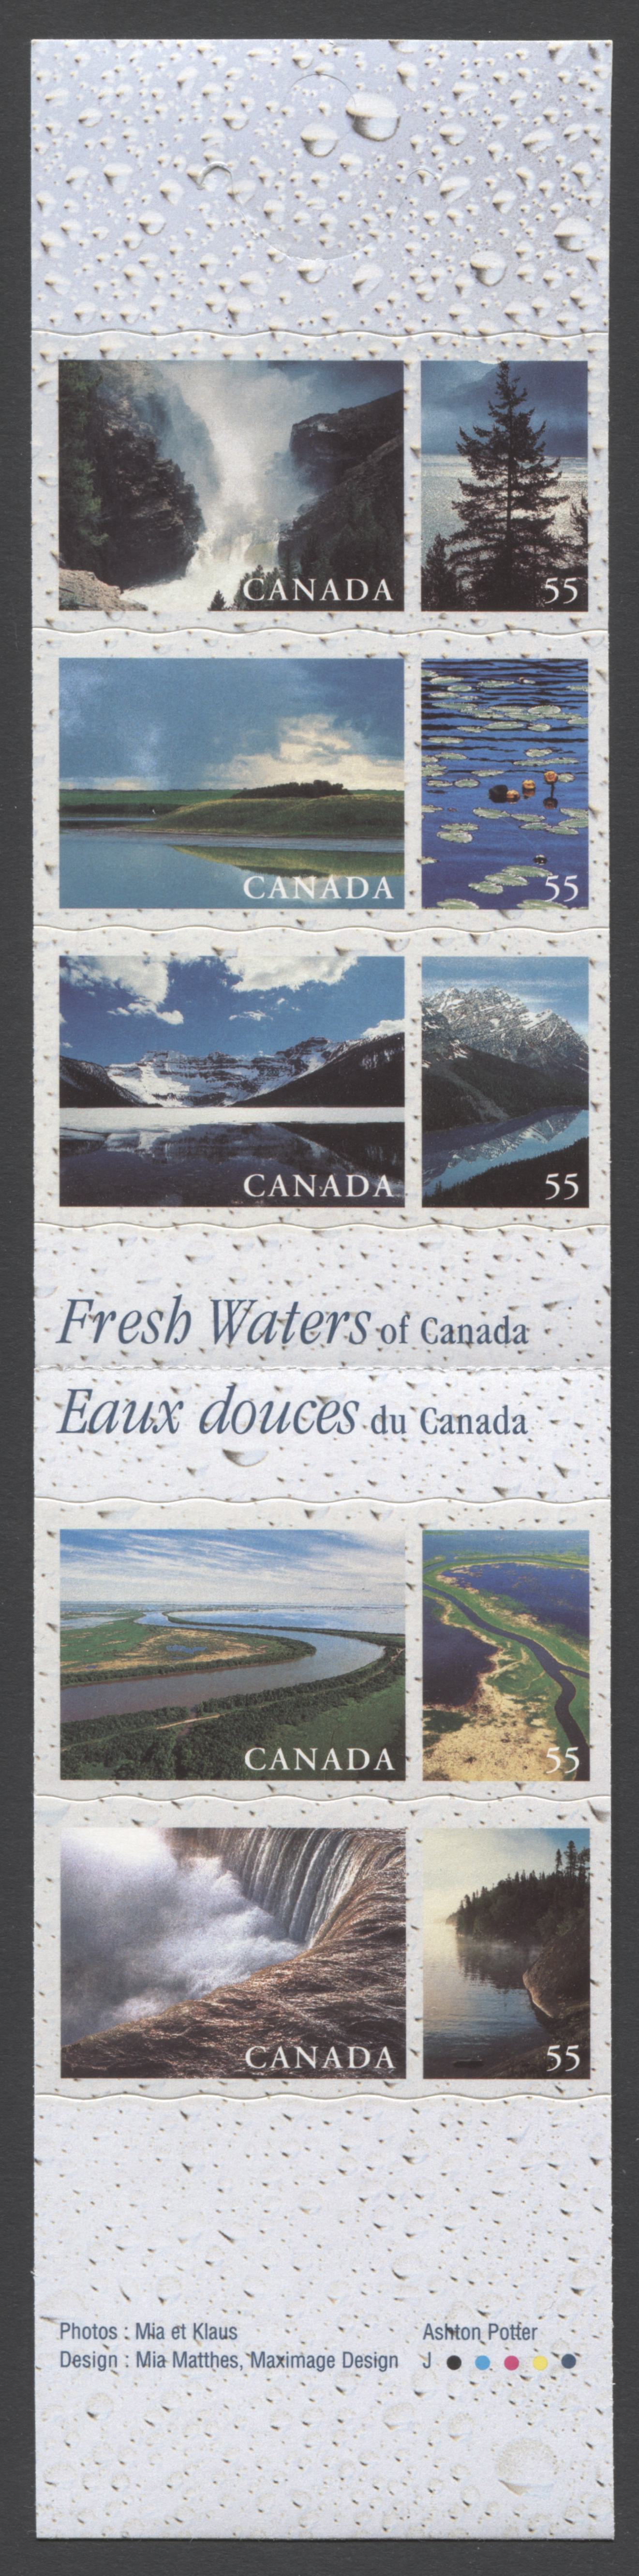 Canada #BK228a-b 2000 Fresh Waters of Canada Issue, Complete $2.75 Booklet, JAC Paper, Dead Paper, 4 mm GT-4 Tagging